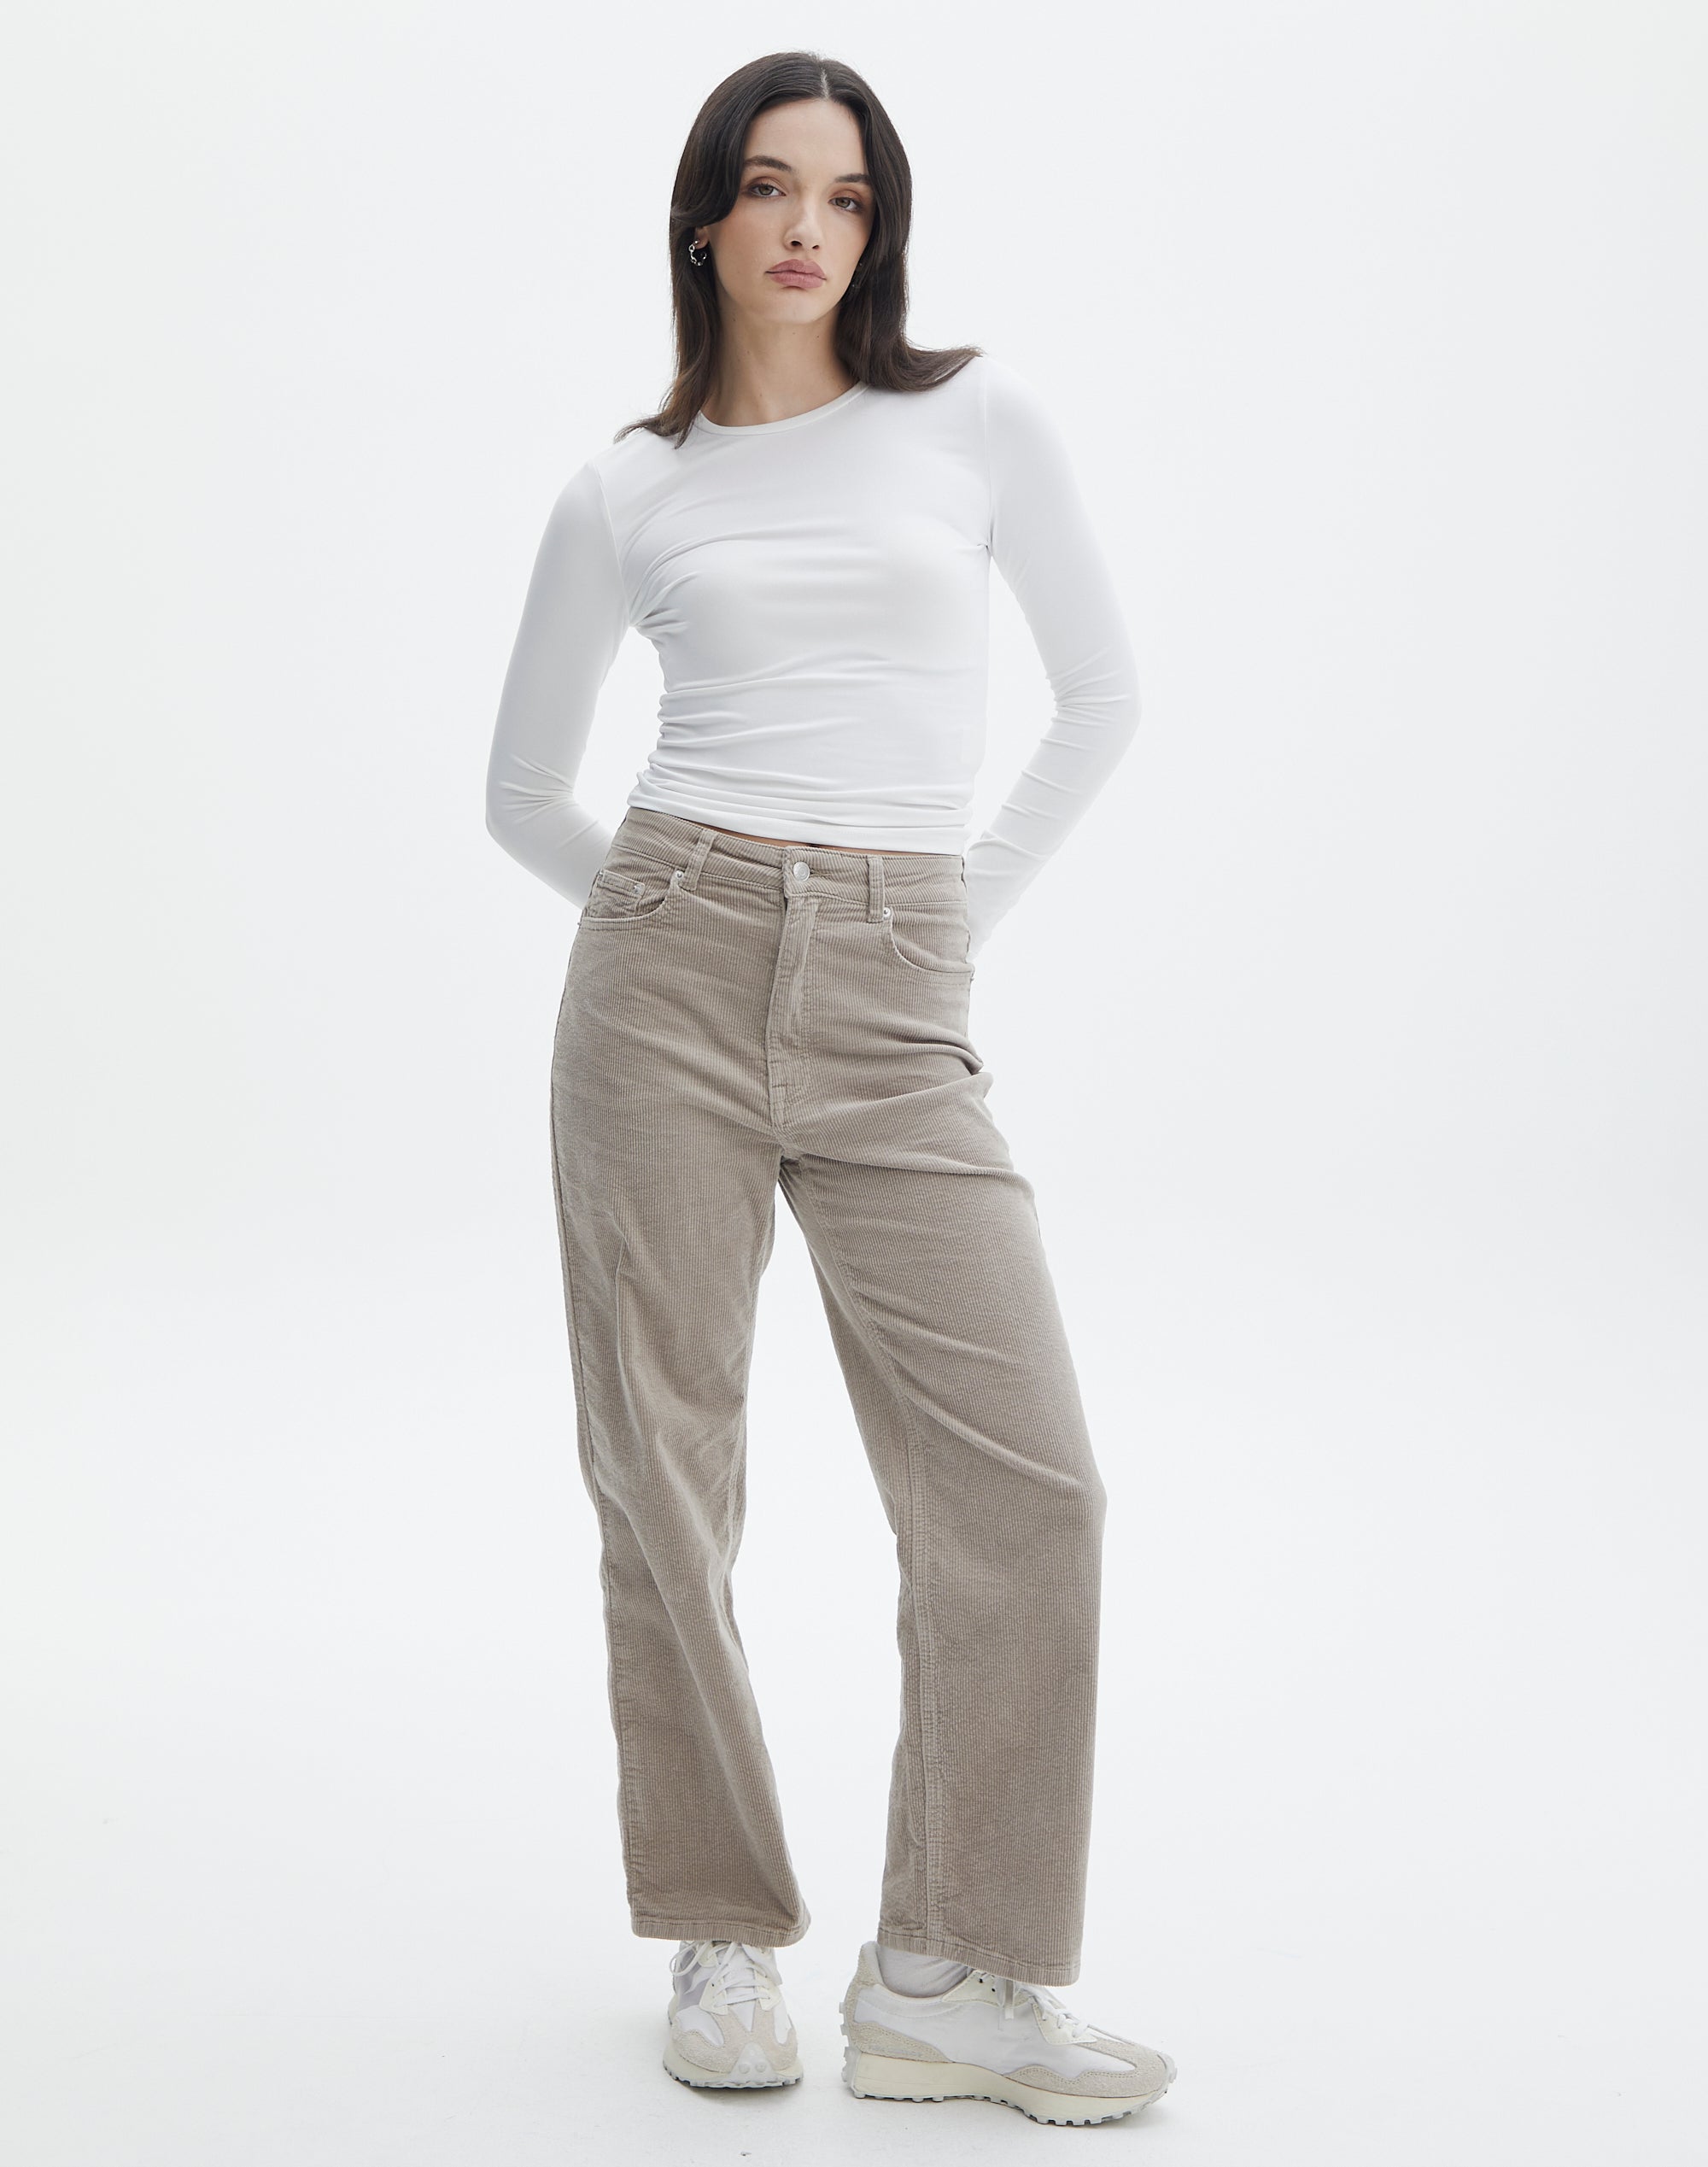 Belle Cord Full Length Pant in Pewter - Glue Store NZ